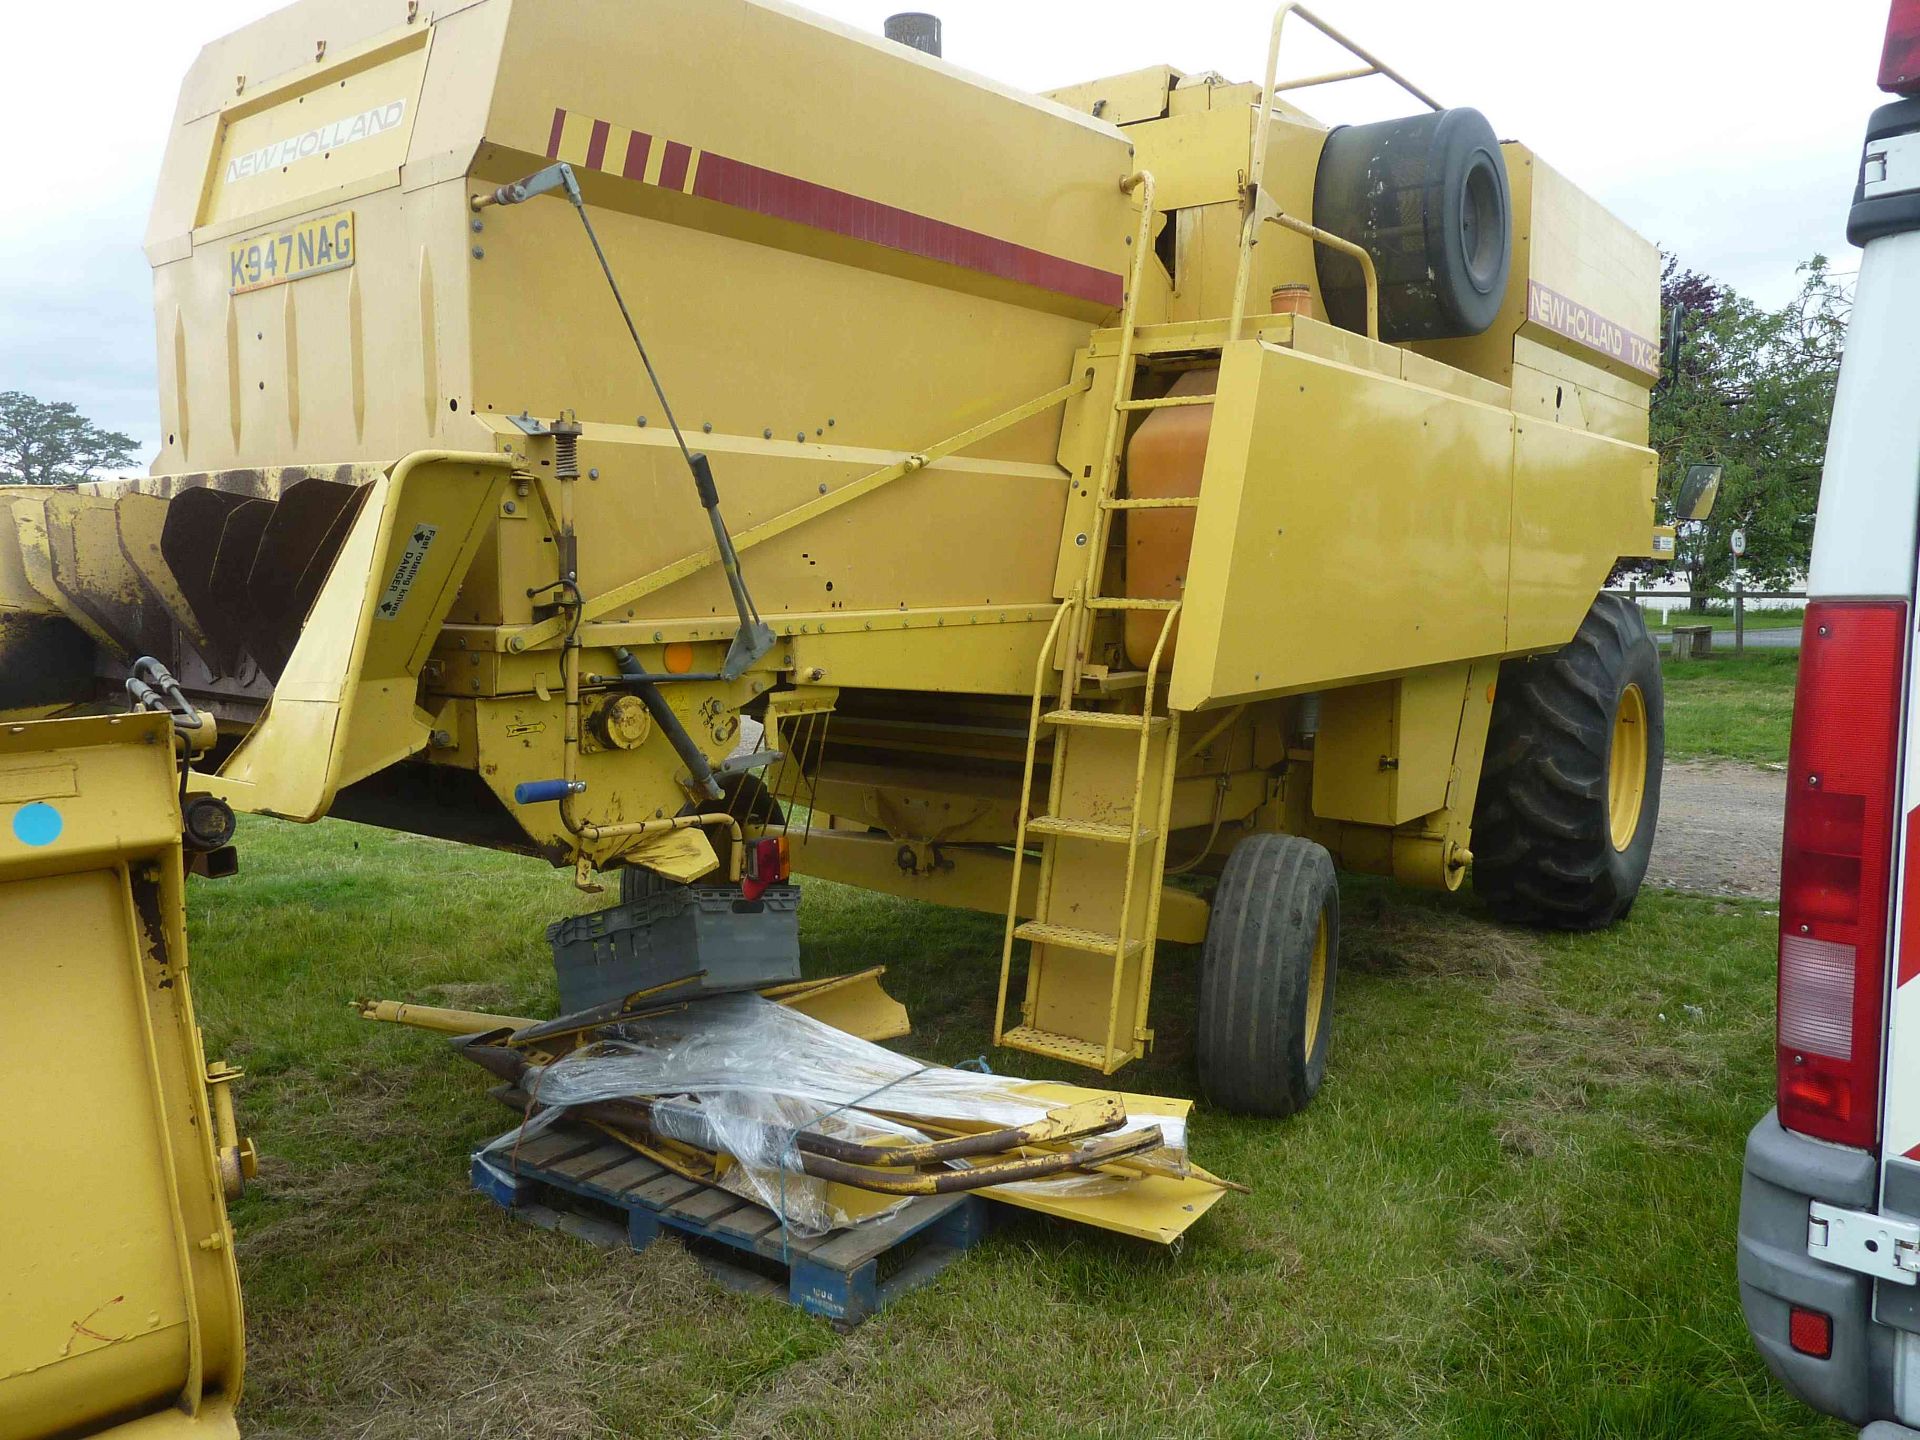 New Holland TX32 combine c/w 15' header, K947 NAC, 2000hrs and recent service - Image 2 of 3